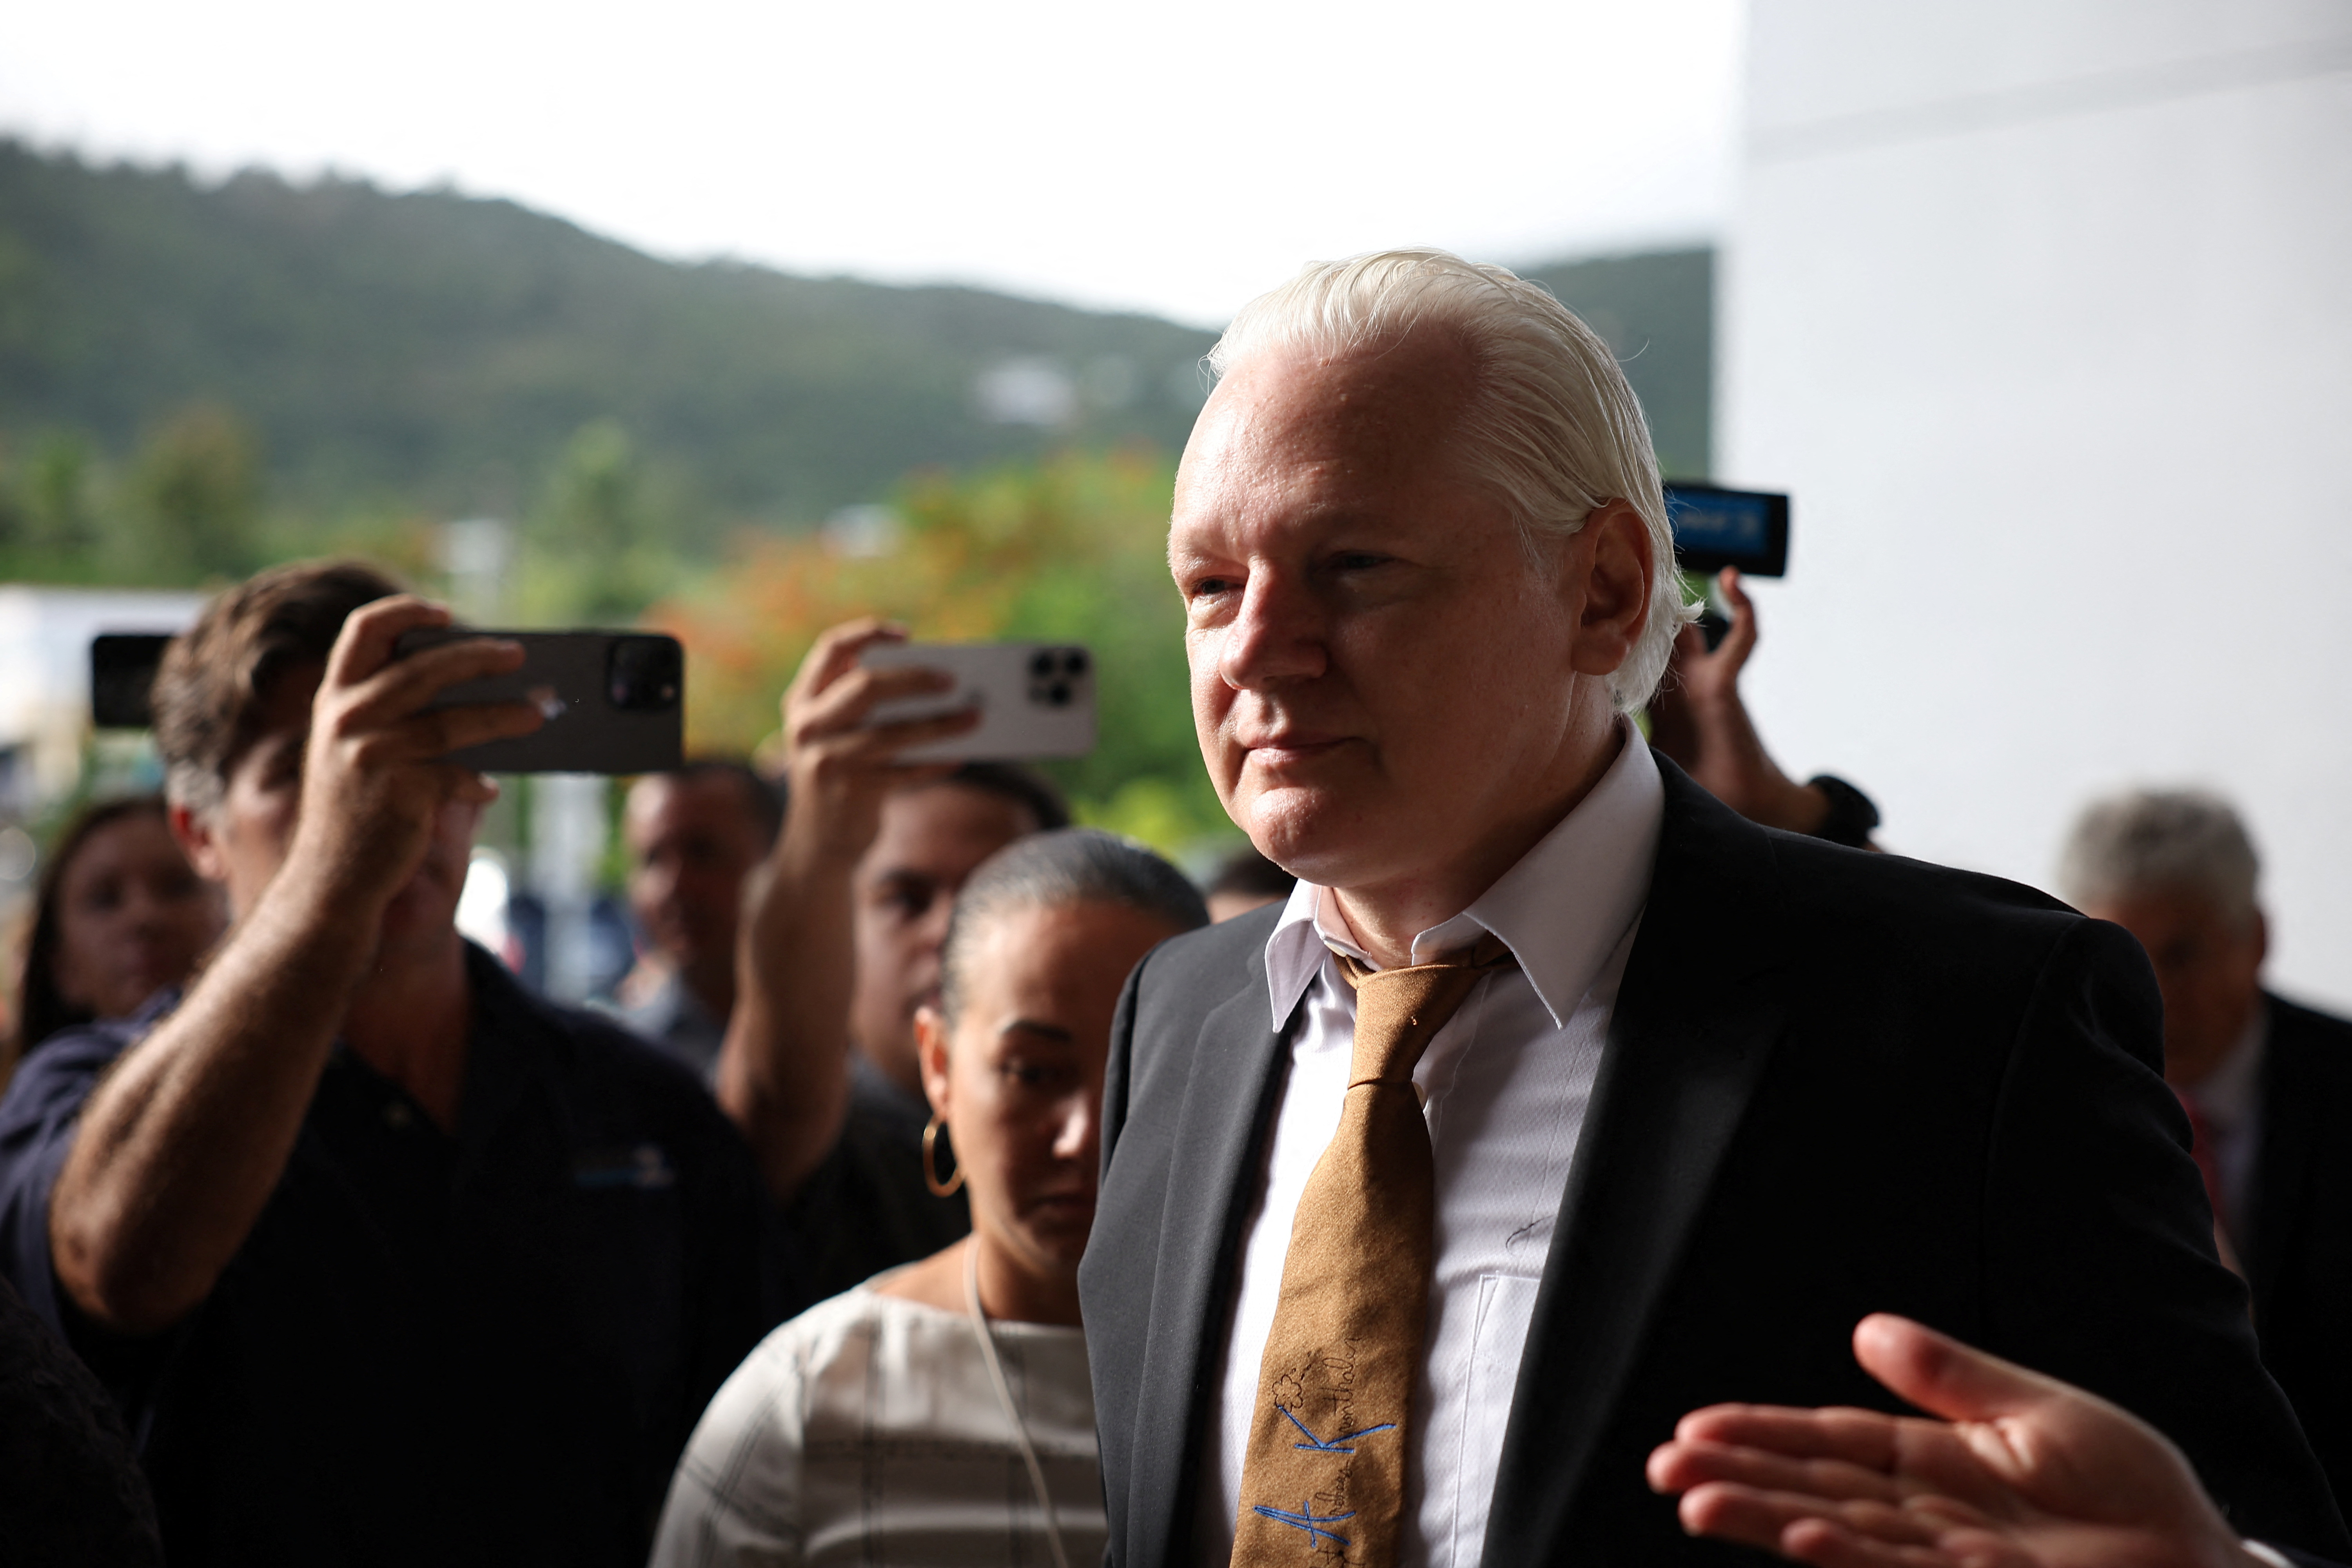 WikiLeaks founder Julian Assange appears at a U.S. District Court in Saipan